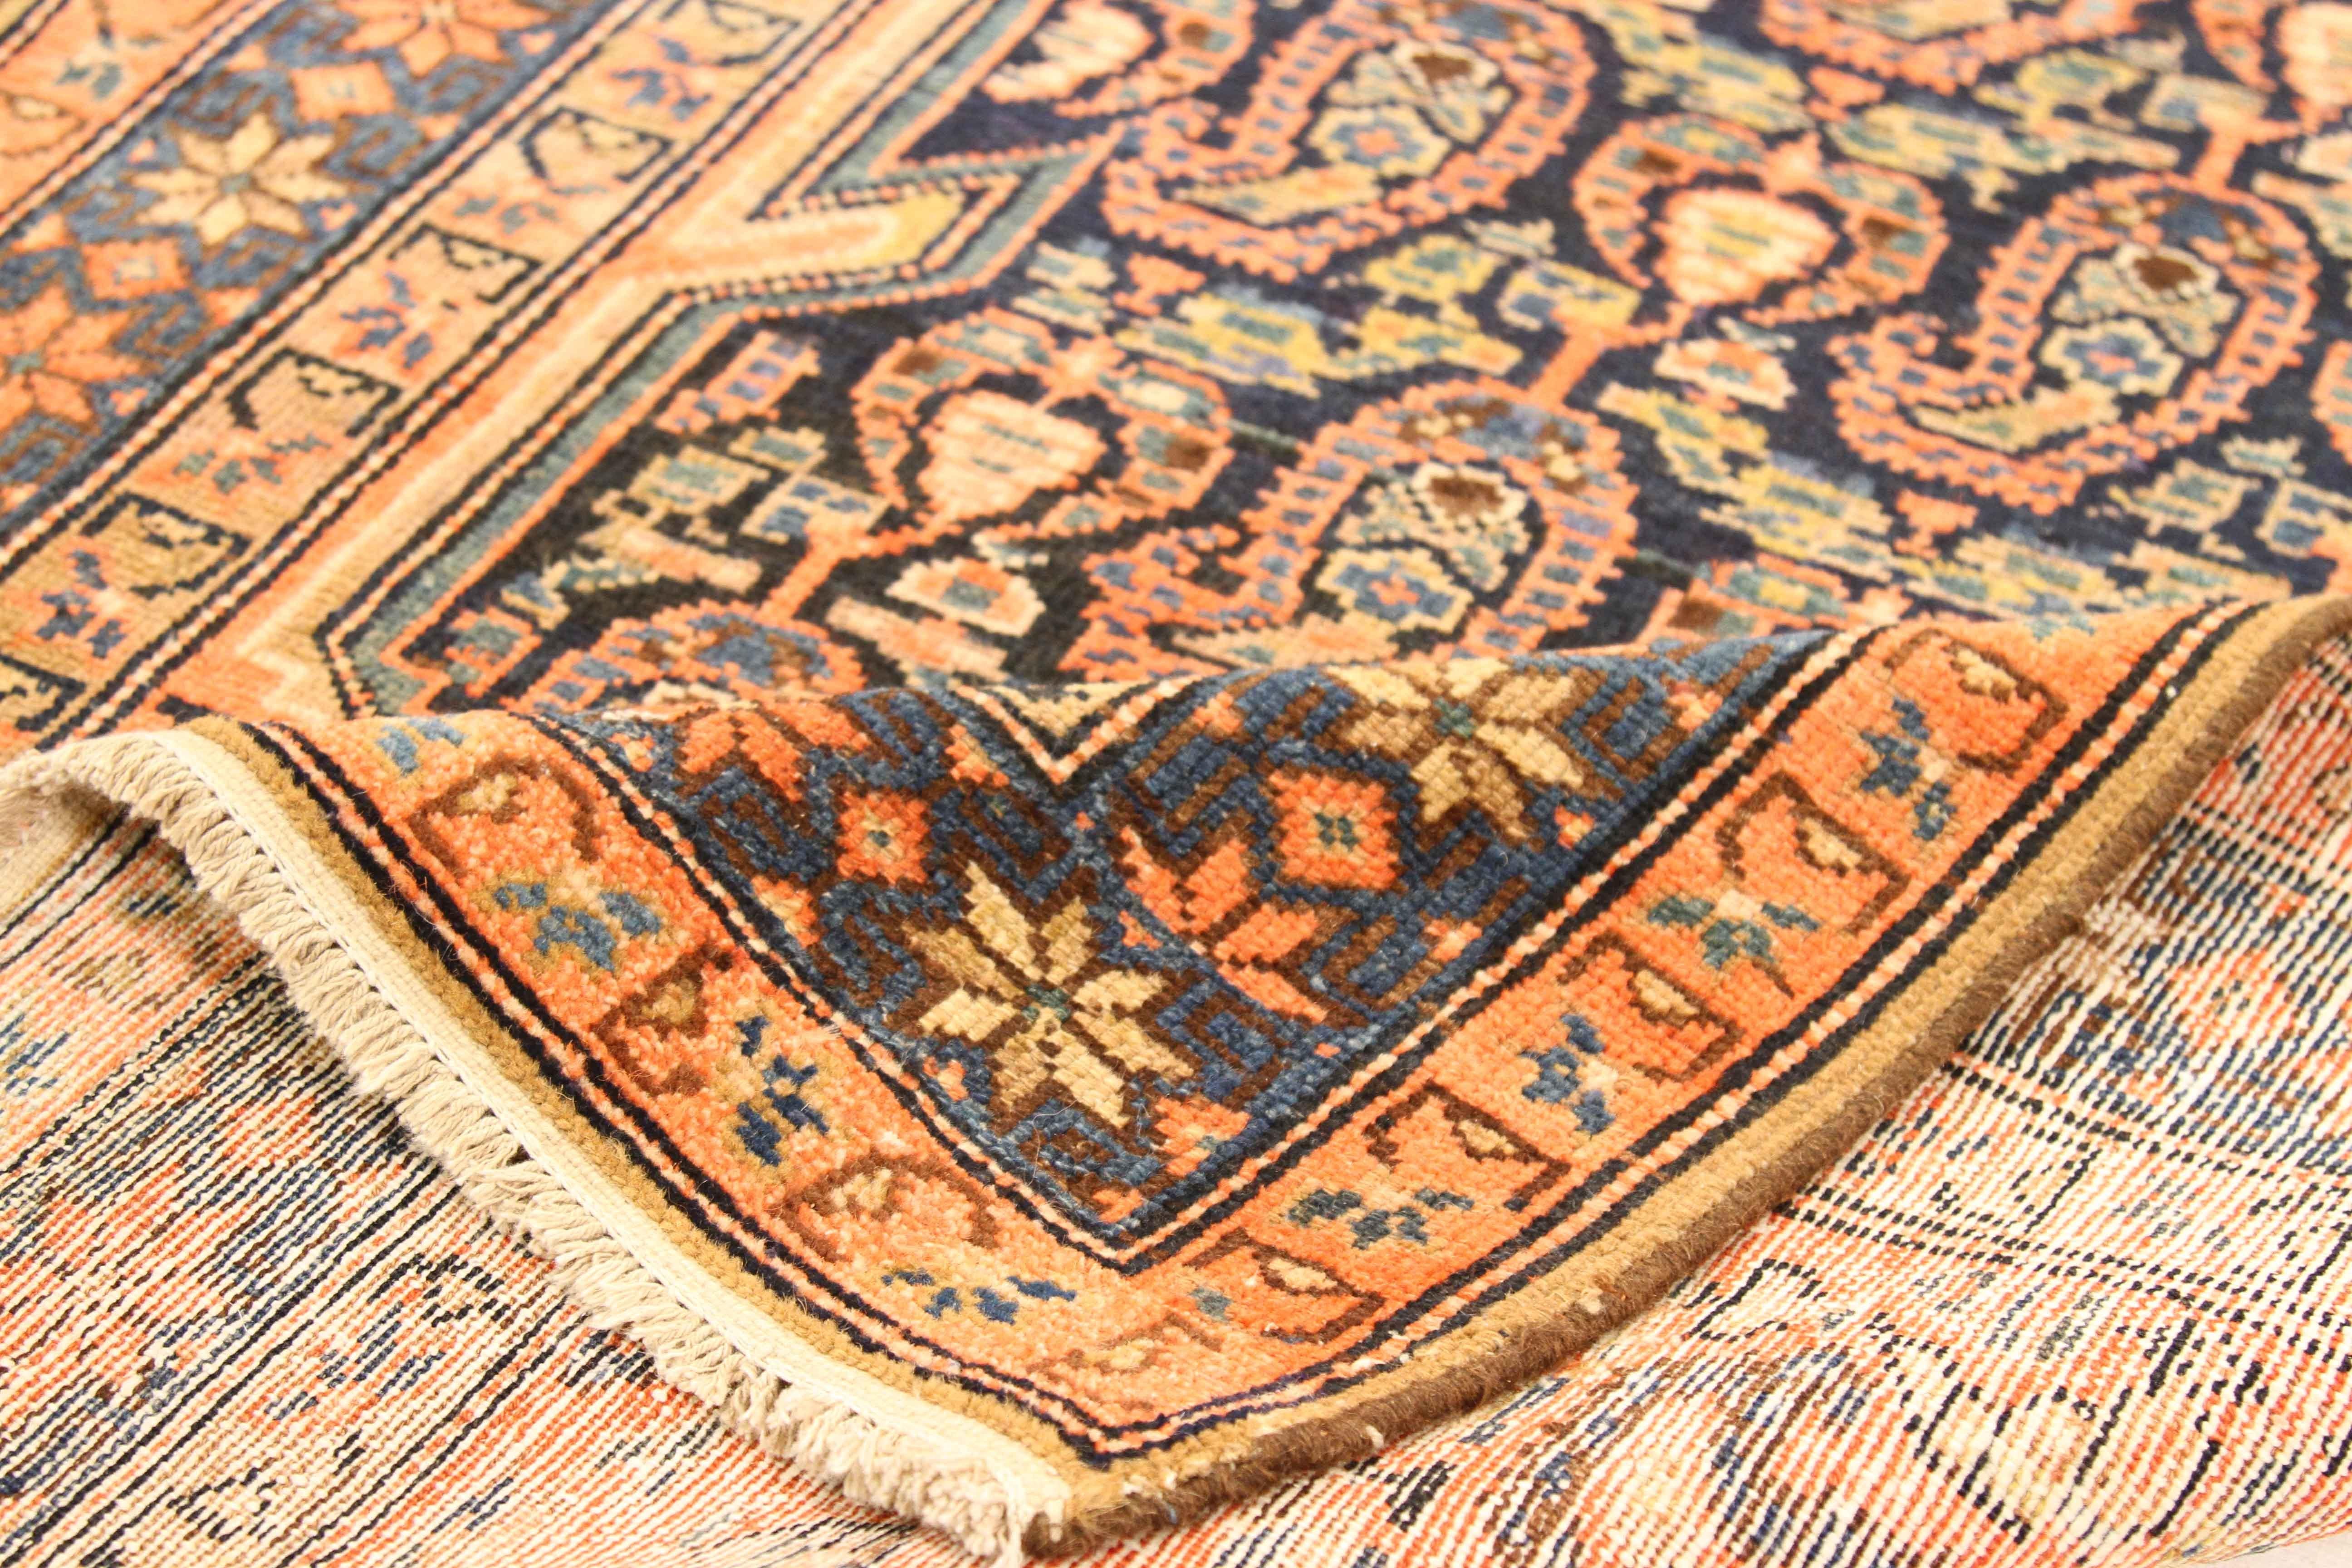 Antique Persian runner rug handwoven from the finest sheep’s wool and colored with all-natural vegetable dyes that are safe for humans and pets. It’s a traditional Malayer design featuring ‘Boteh’ details in ivory, pink and brown. It resembles a